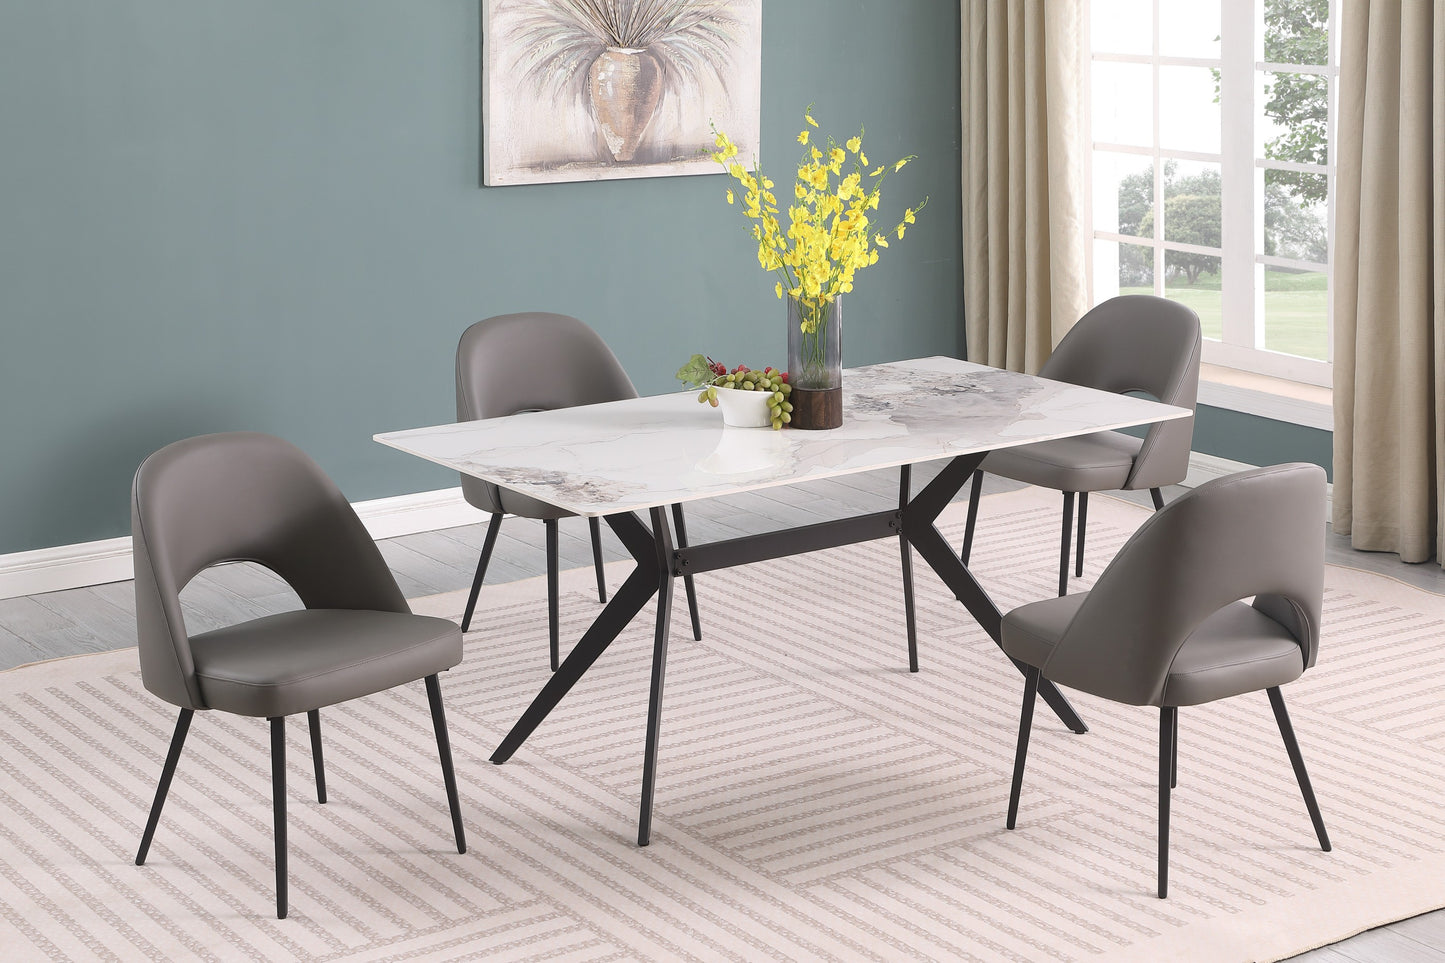 Hampshire 5 Piece Dining Set with Grey Chairs